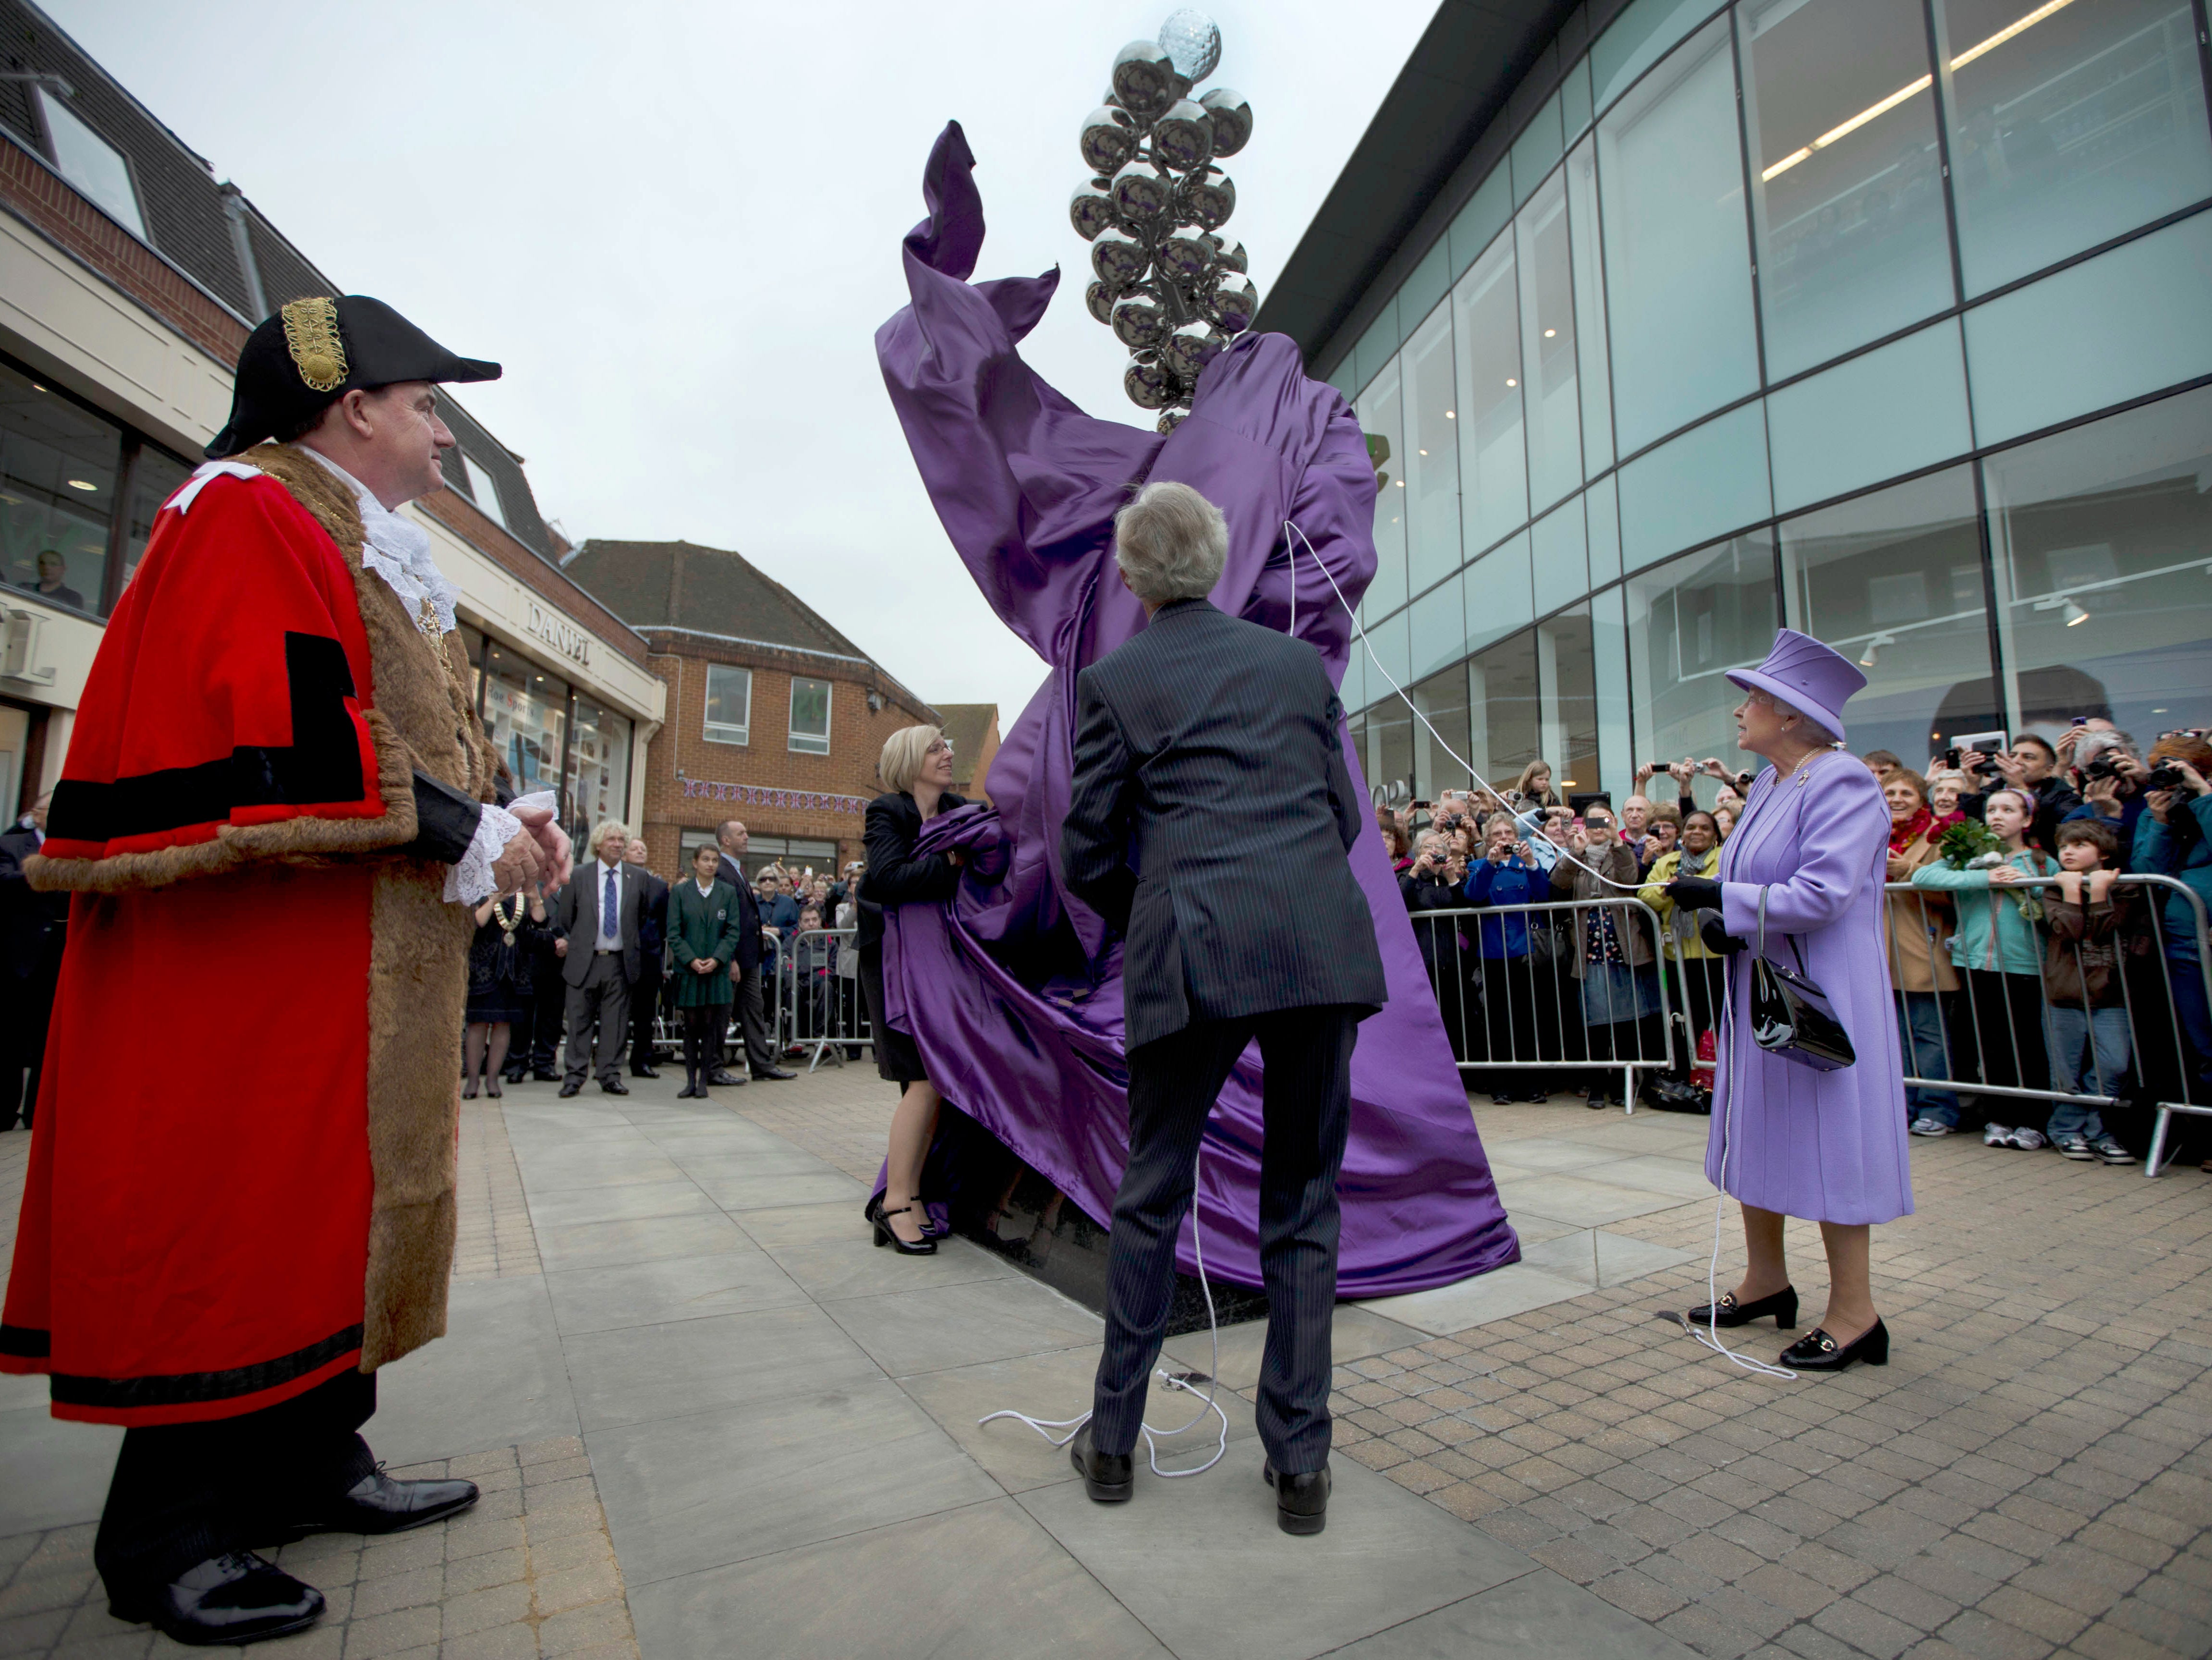 Britain's Queen Elizabeth II unveils a Diamond Jubilee monument to mark her 60 years on the throne, watched by the local mayor Colin Rayner